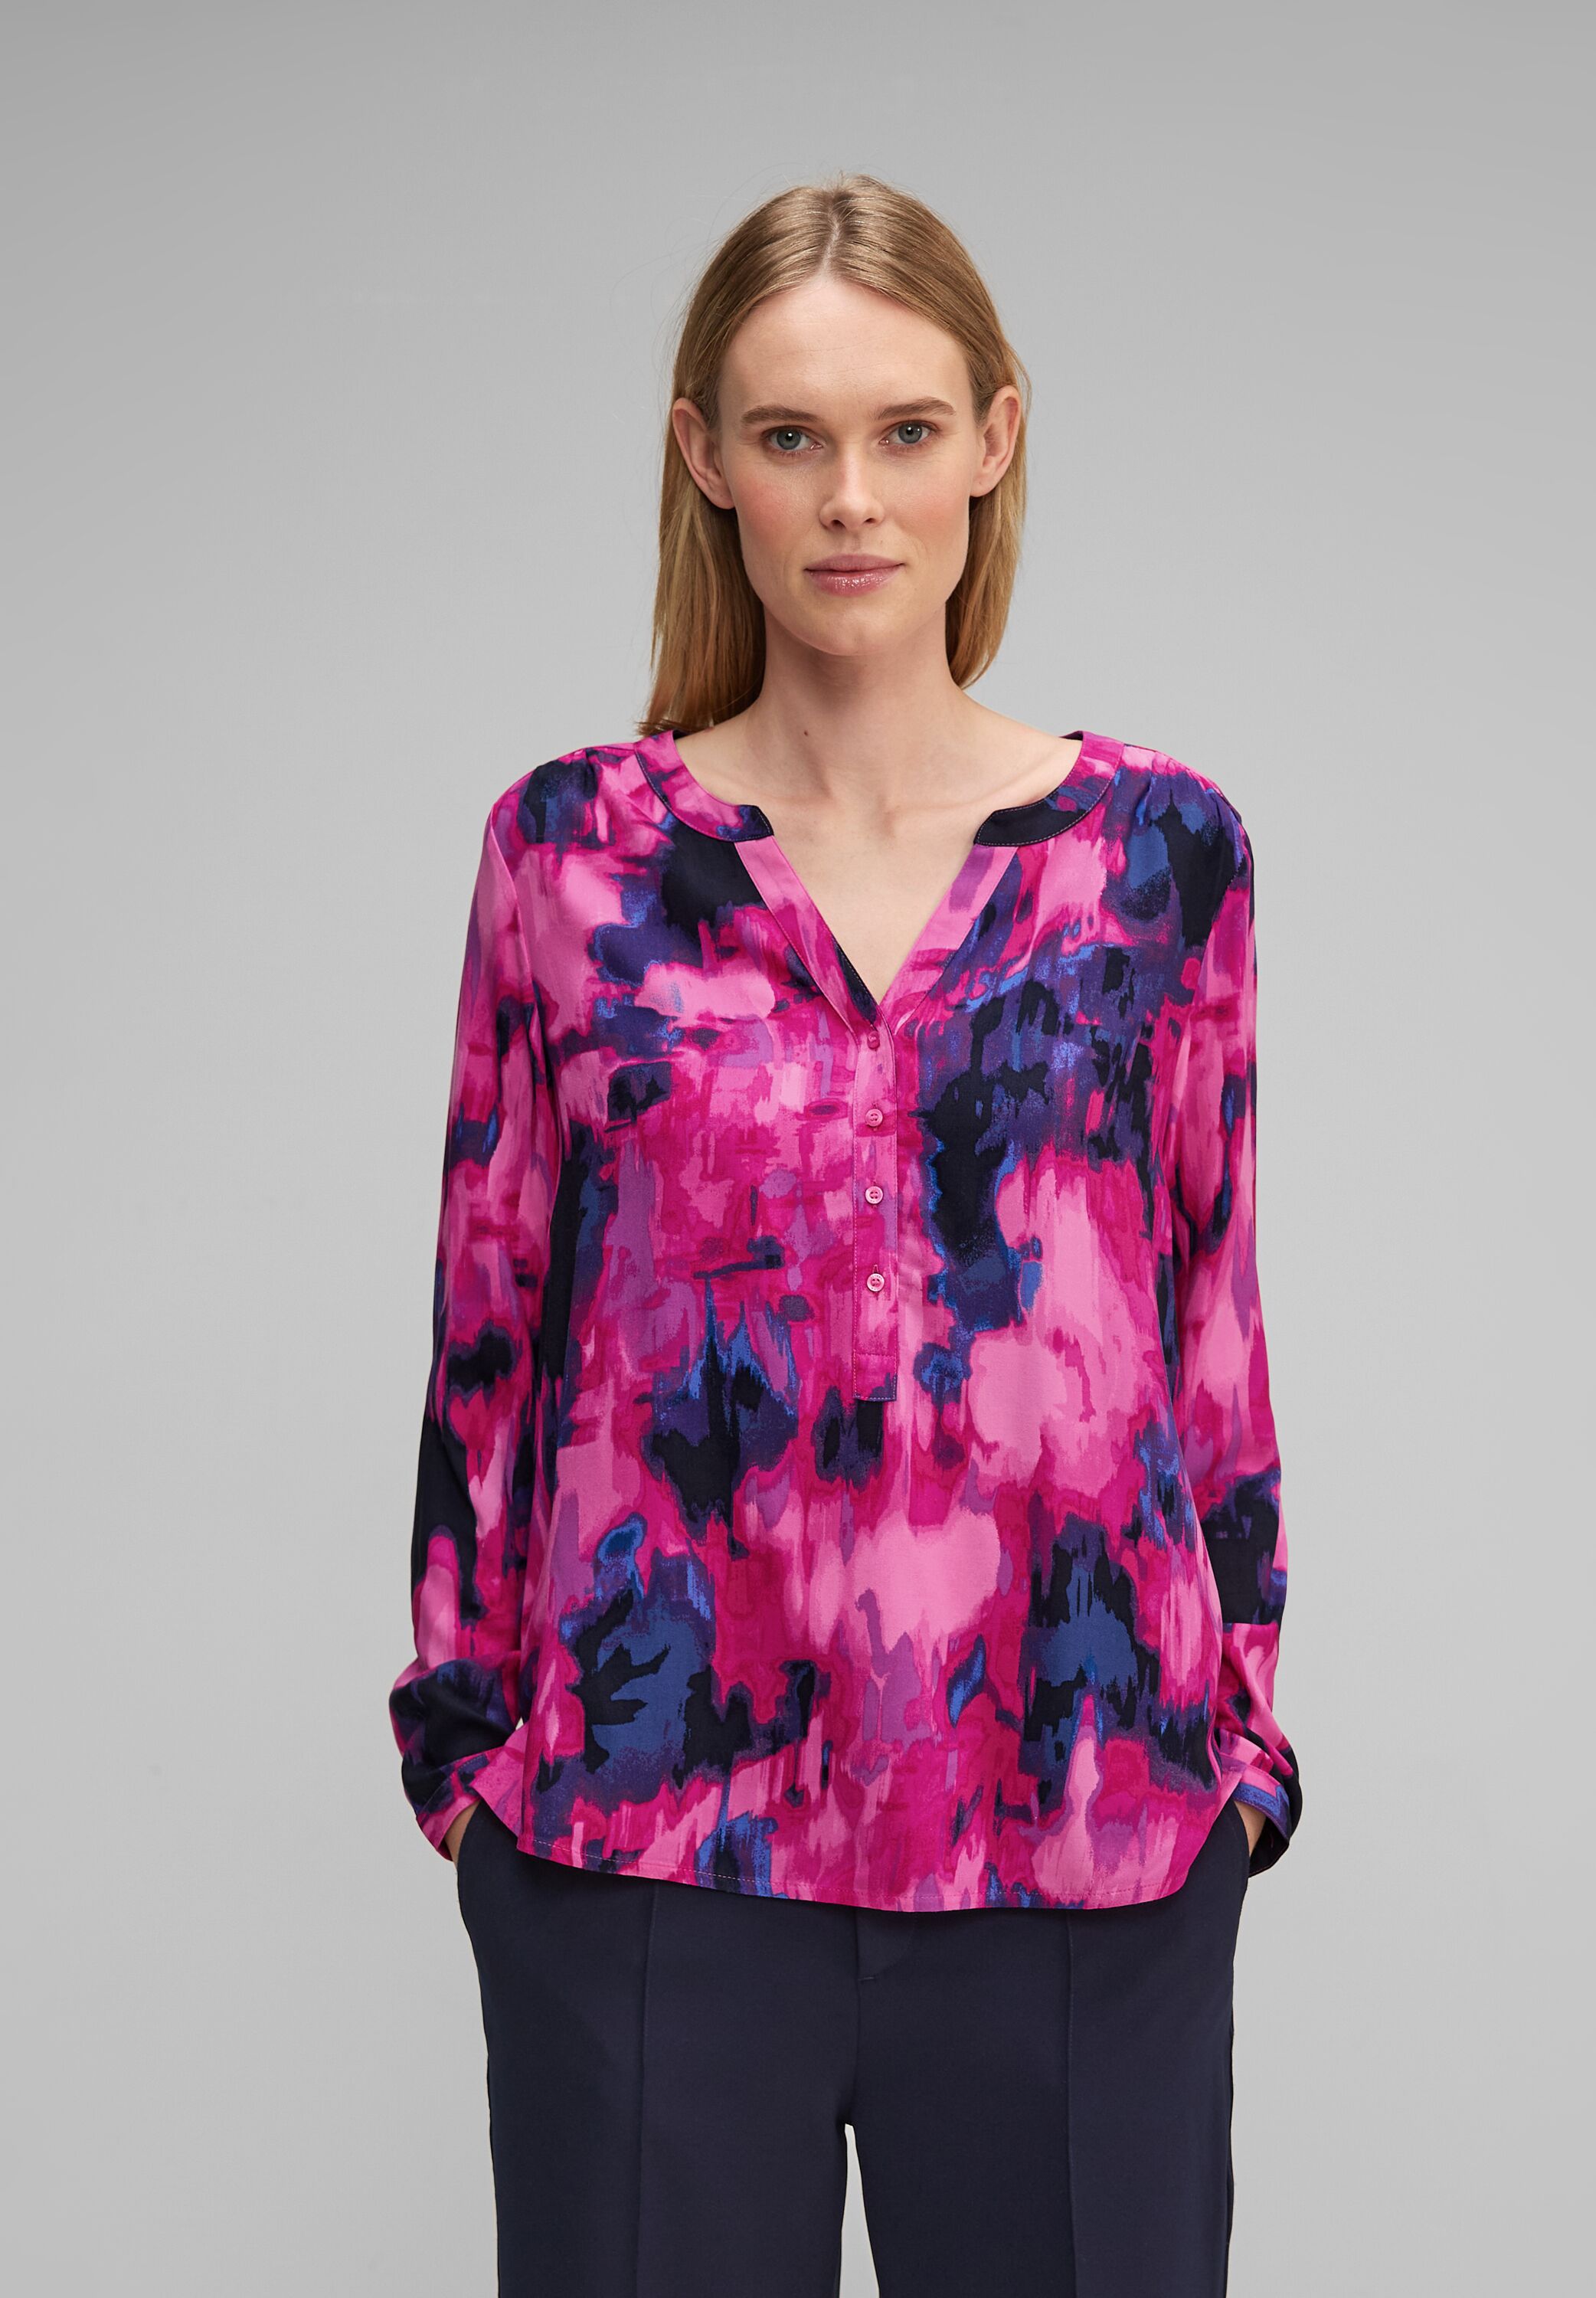 Street One Rundhalsbluse Bamika in Bright Cozy Pink im SALE reduziert  A344378-35463 - CONCEPT Mode